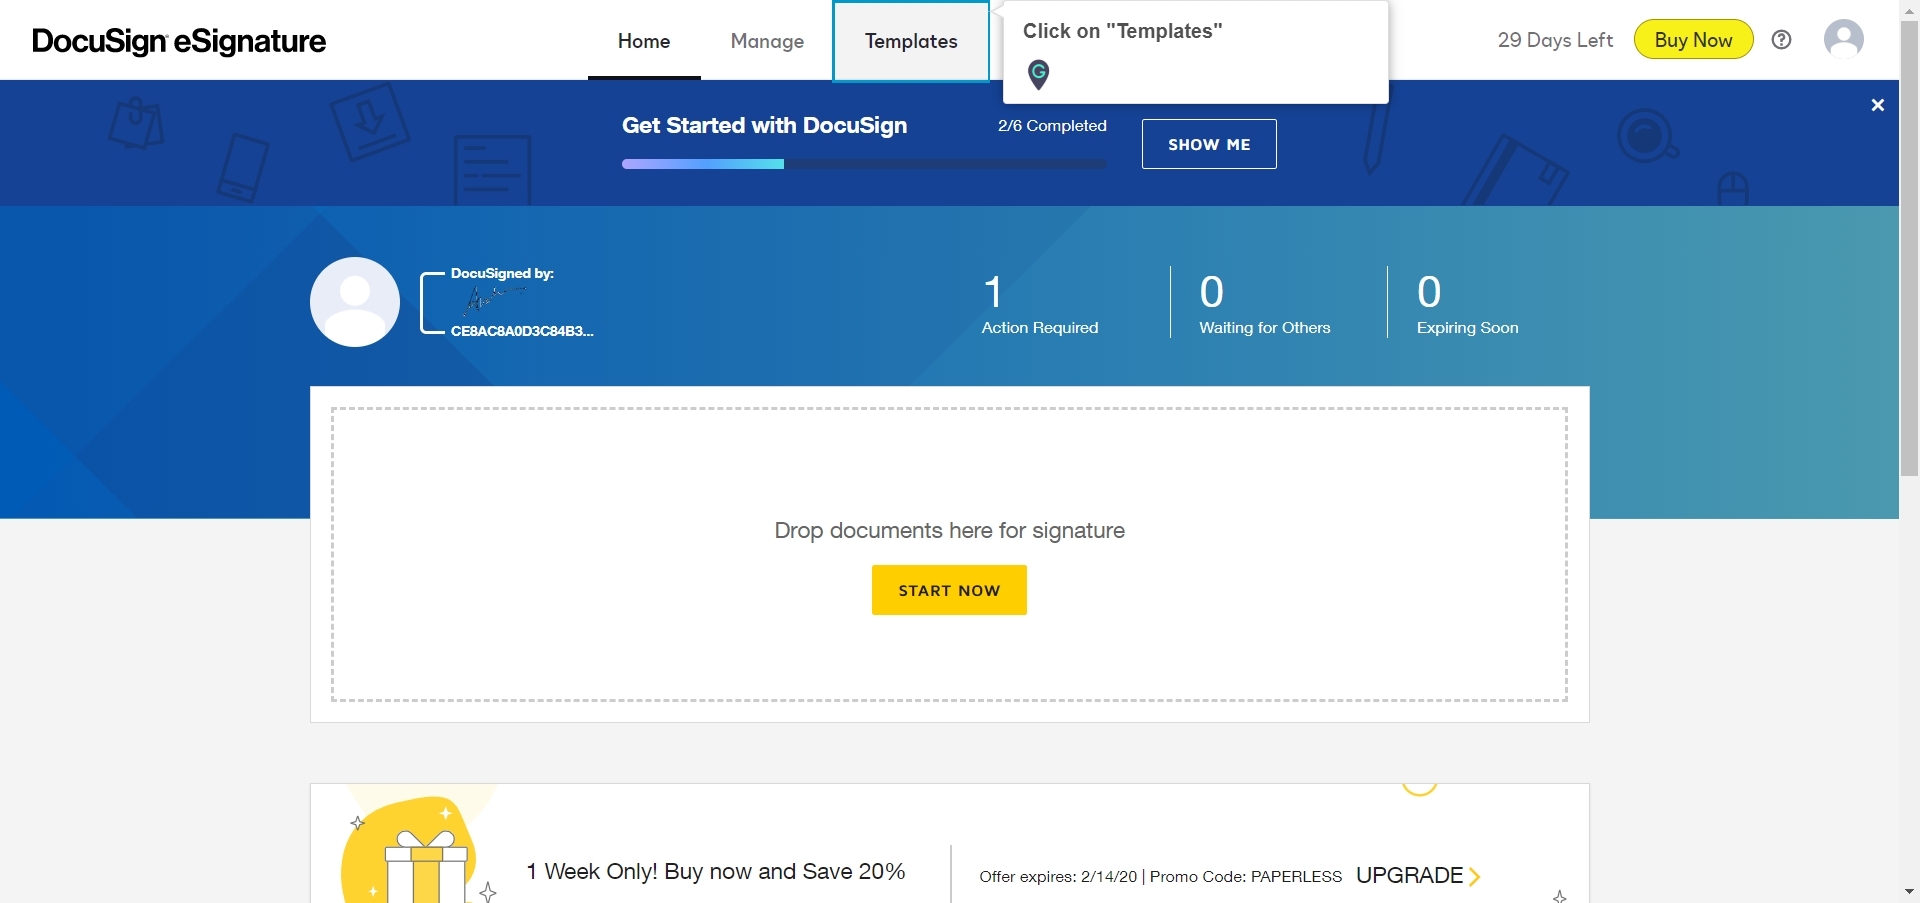 how-to-create-a-new-template-in-docusign-a-guide-by-myguide